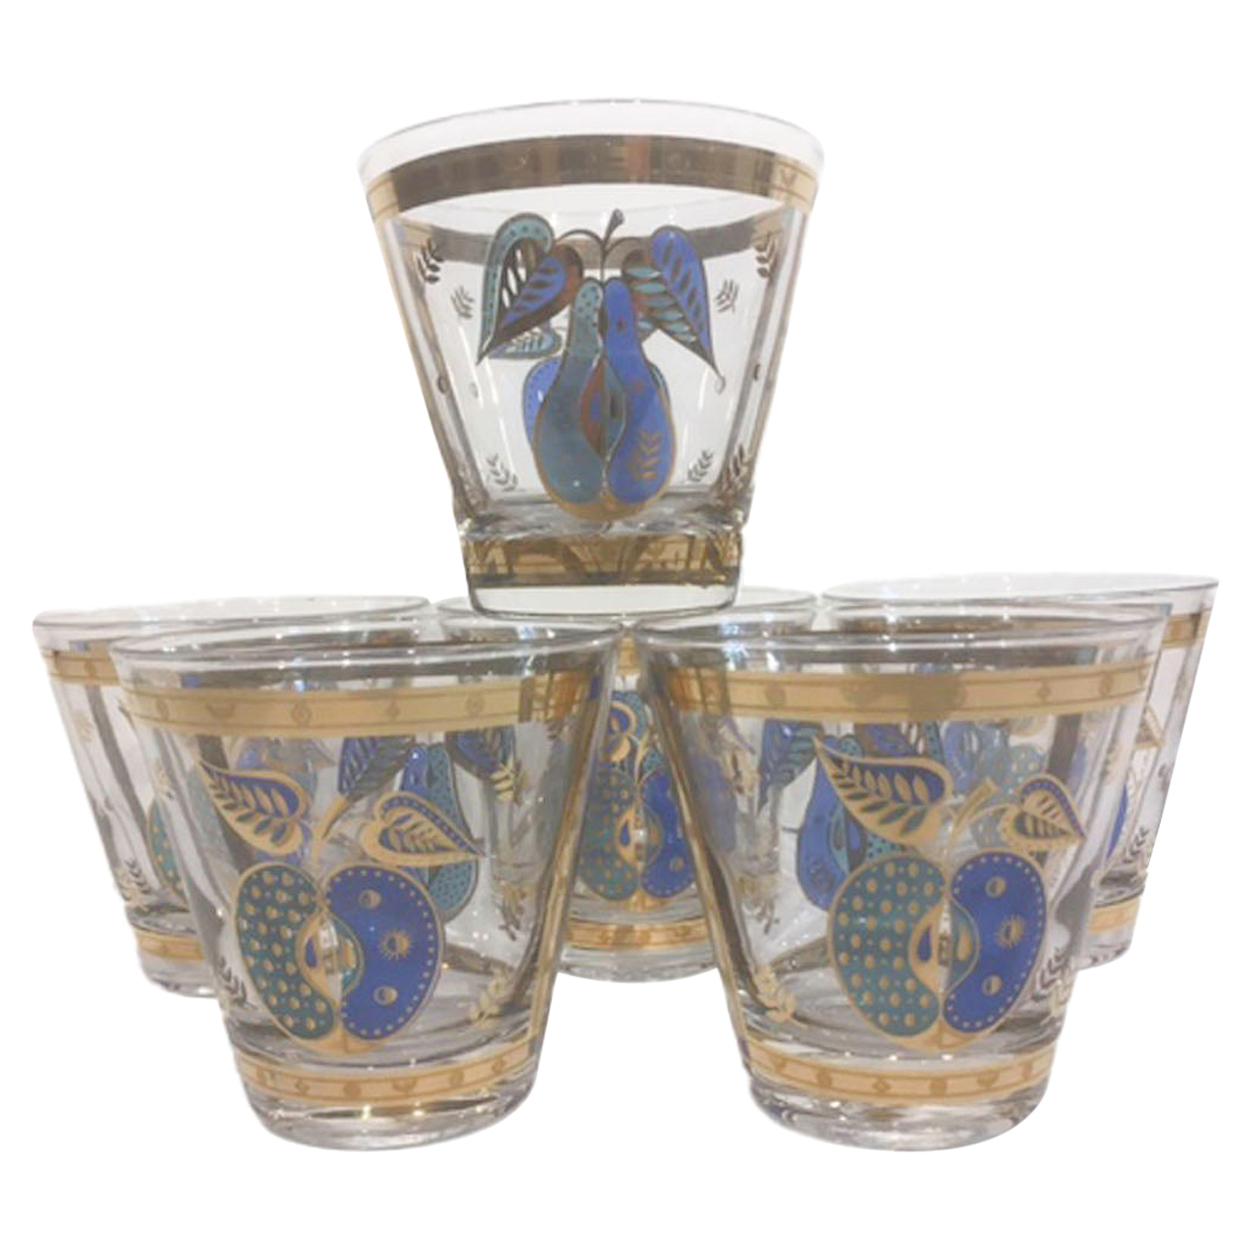 Vintage Old Fashioned Glasses by Georges Briard in the Forbidden Fruit Pattern